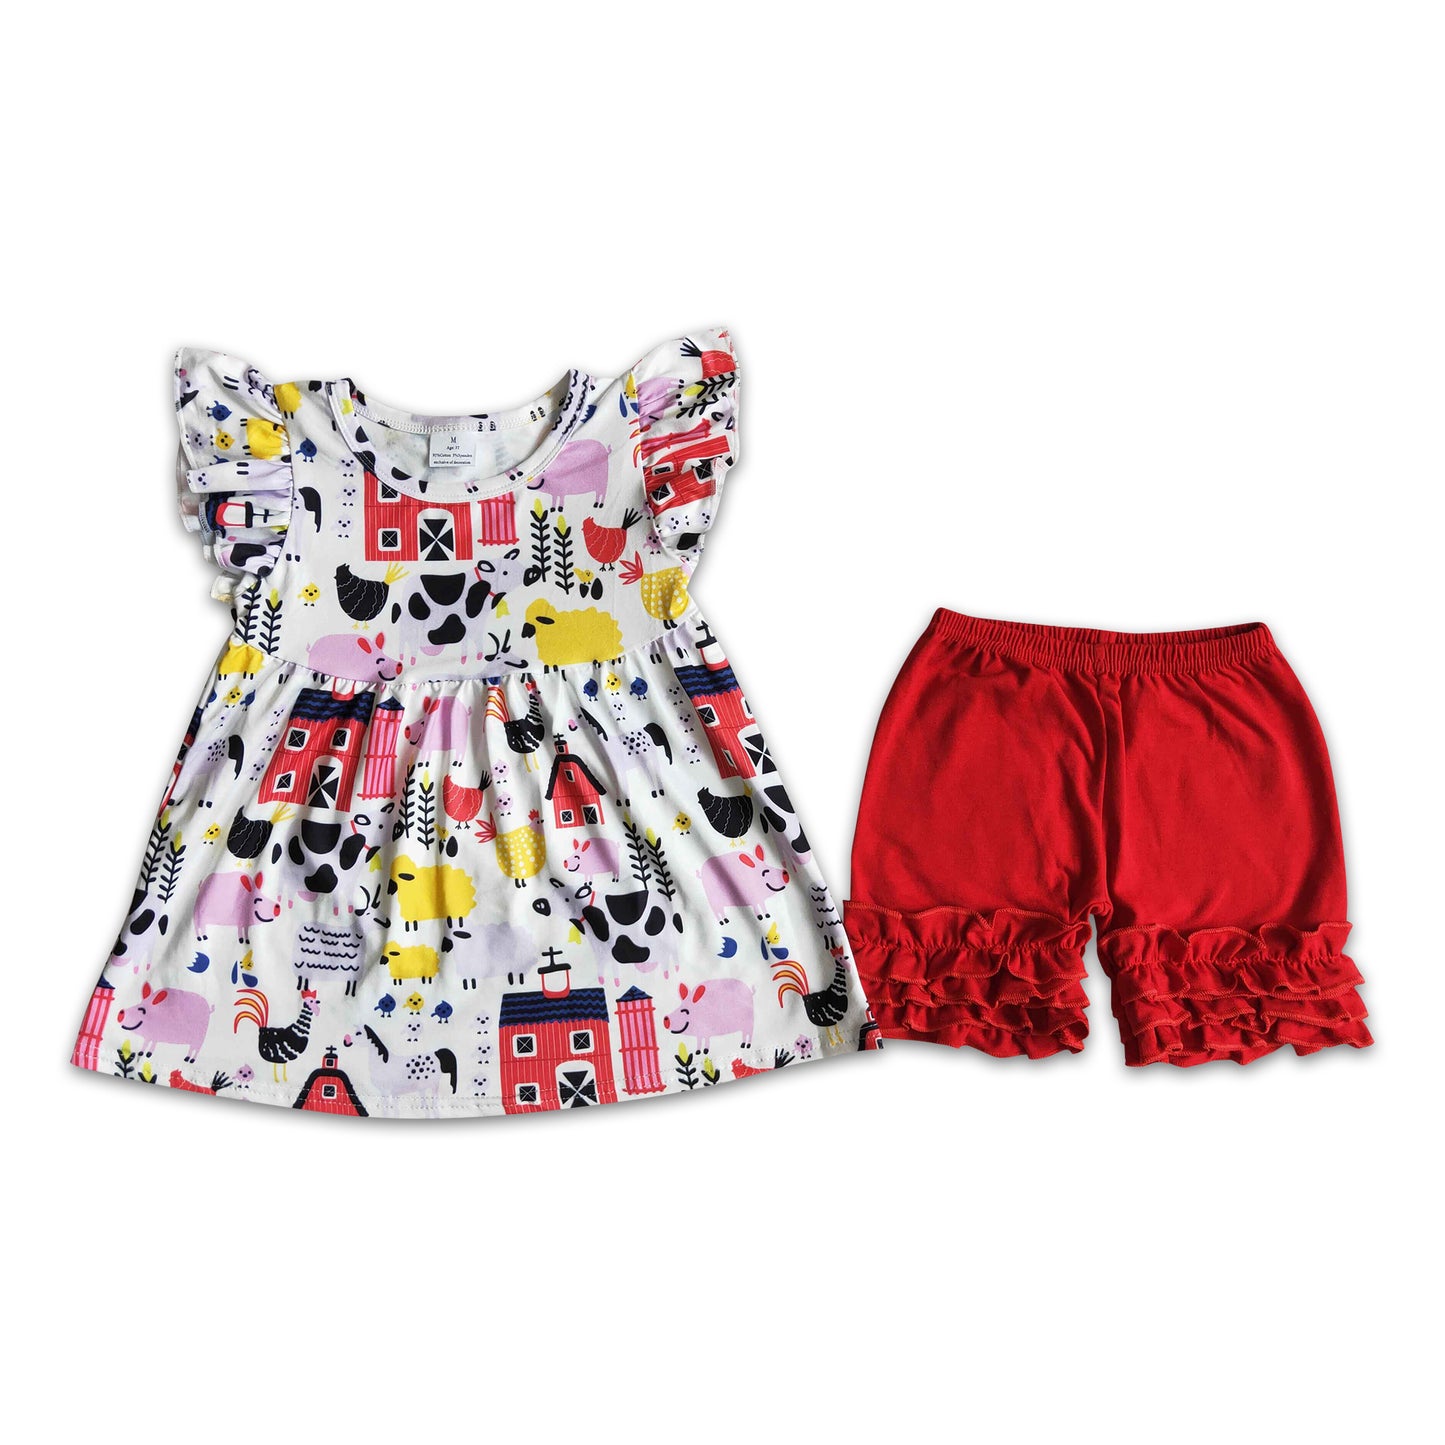 Farm print flutter sleeve red ruffle shorts girls outfits